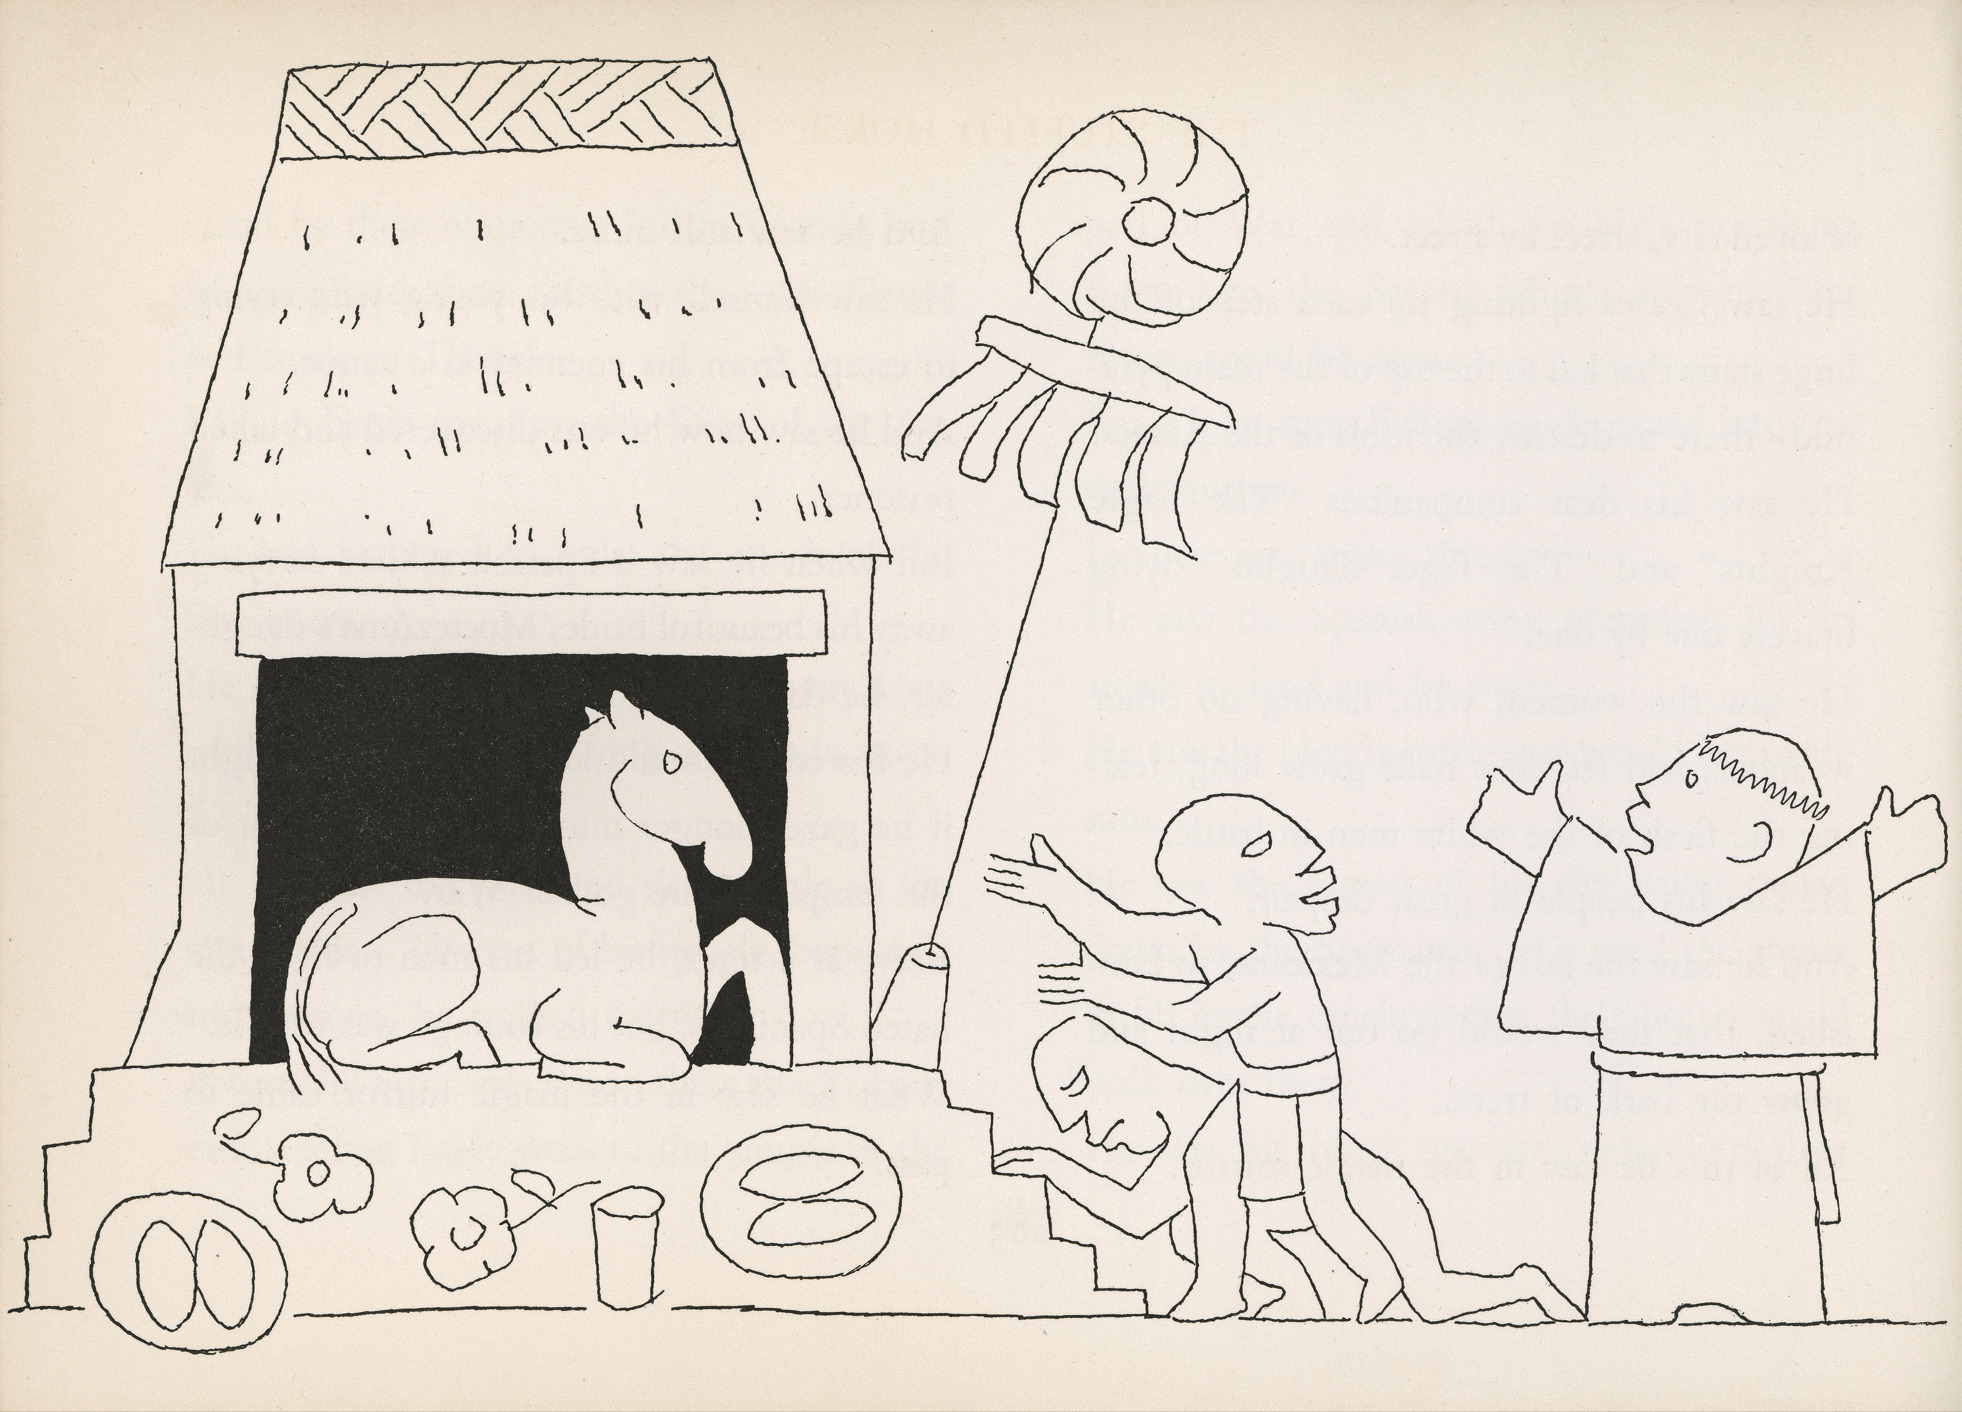 'The stuffed horse' by Jean Charlot in 'The Sun, the Moon and a Rabbit' written by Amelia Martinez del Rio.